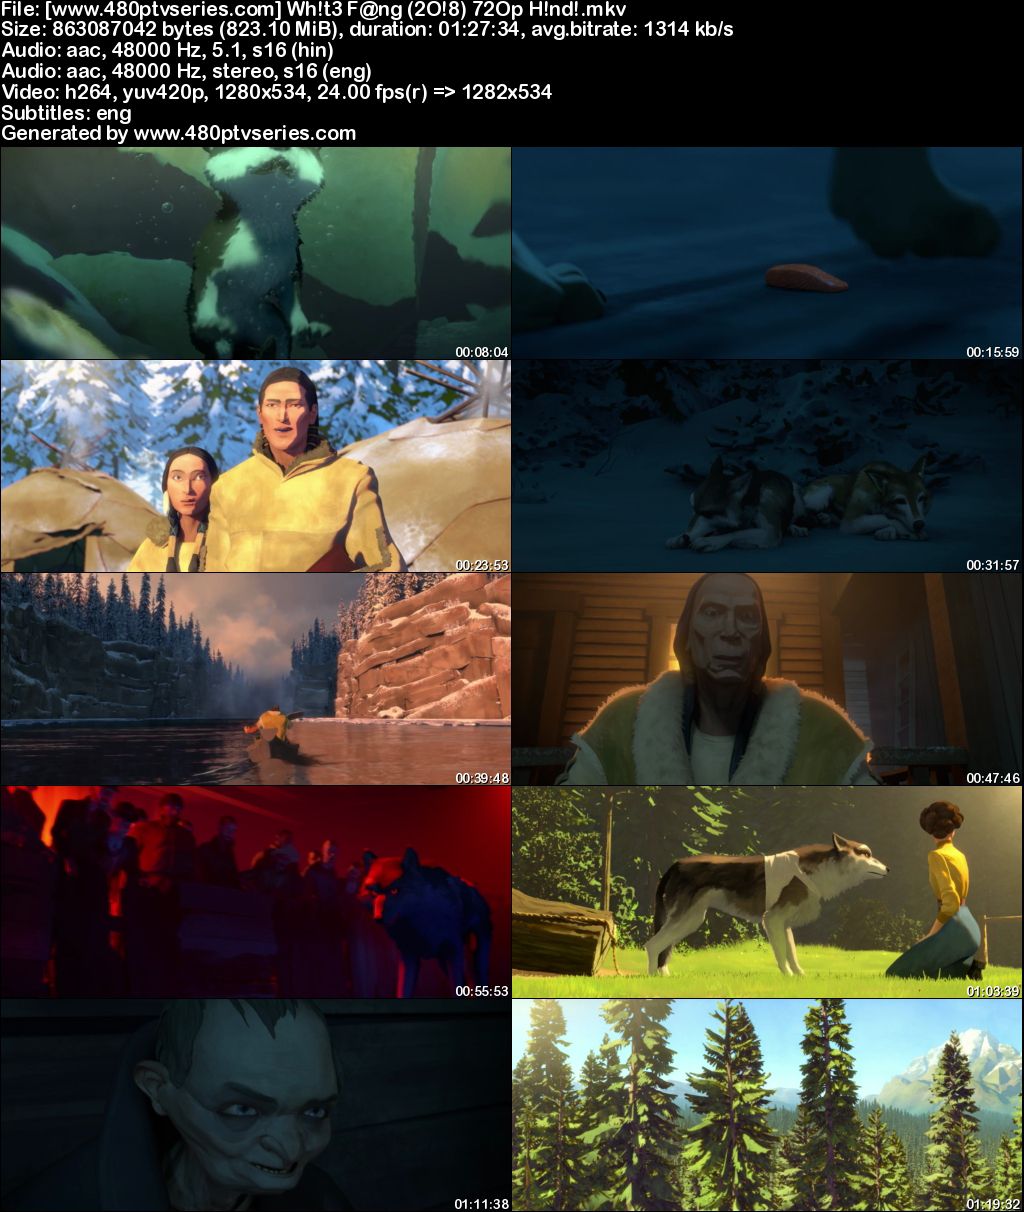 Watch Online Free White Fang (2018) Full Hindi Dual Audio Movie Download 480p 720p Web-DL